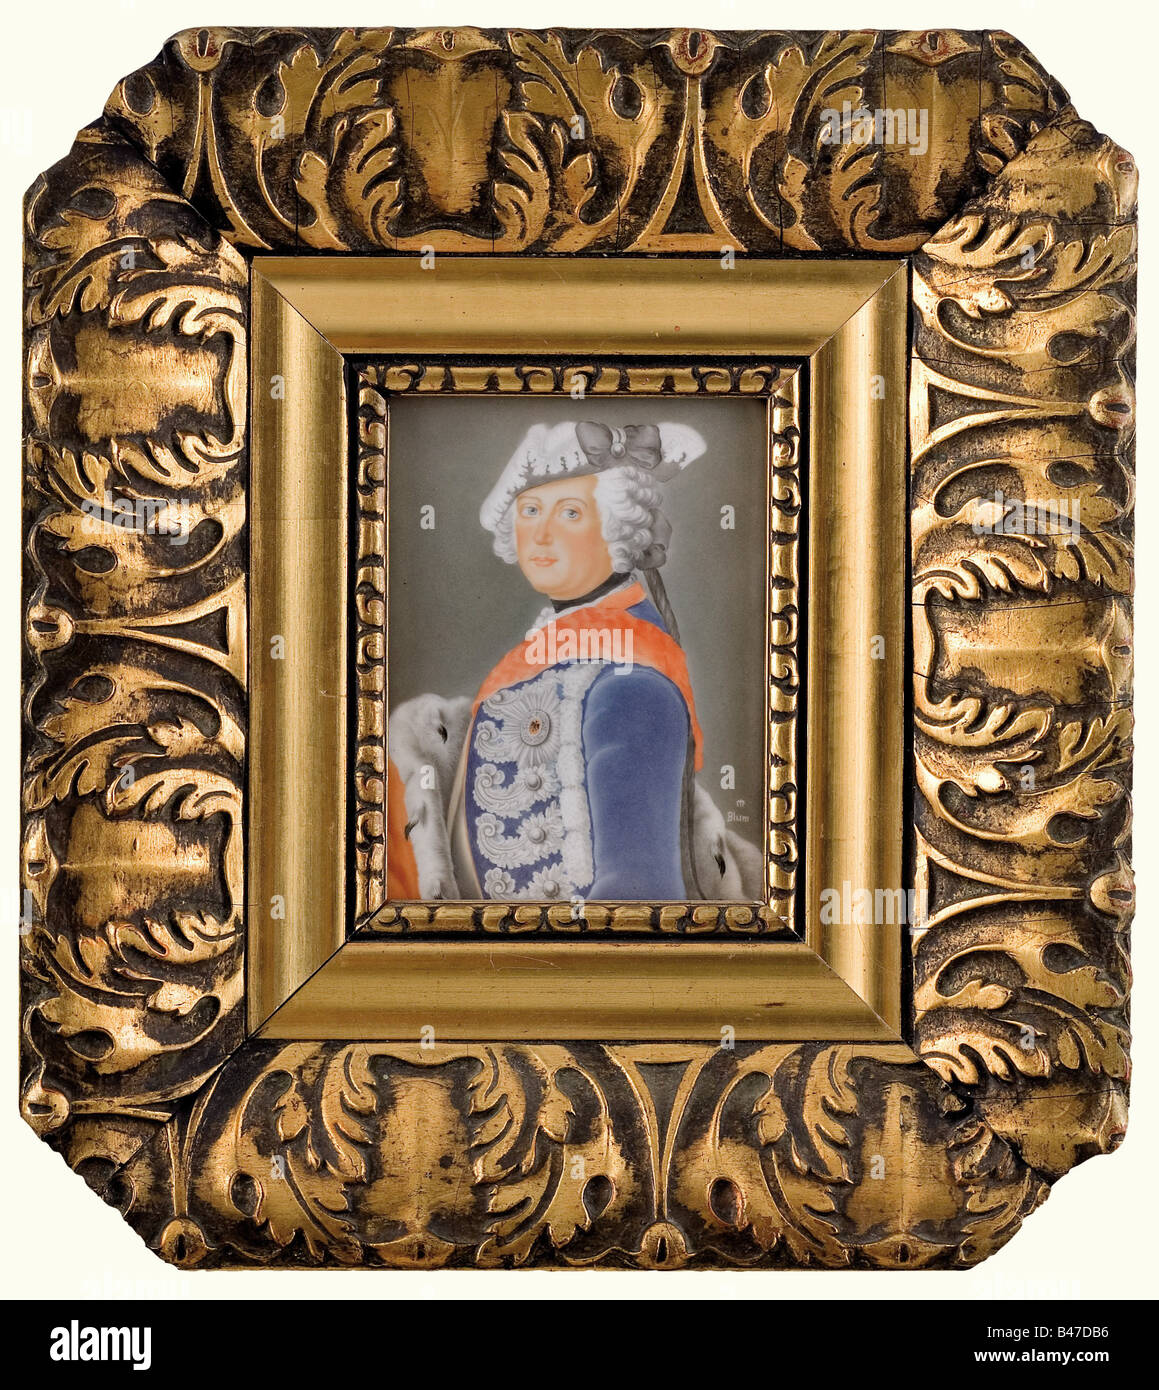 Frederick the Great., A 19th century porcelain portrait after a painting by Antoine Pesne (1683 - 1757) showing the king as a young man in uniform and with an ermine coat wrapped around his shoulders, facing the spectator. Marked 'Blum' on the lower right. In a heavy gilt stucco frame with acanthus decoration. Size of the porcelain plaque 15.5 x 12 cm. Framed 32 x 35 cm. people, 18th century, Prussian, Prussia, German, Germany, militaria, military, object, objects, stills, clipping, clippings, cut out, cut-out, cut-outs, Stock Photo